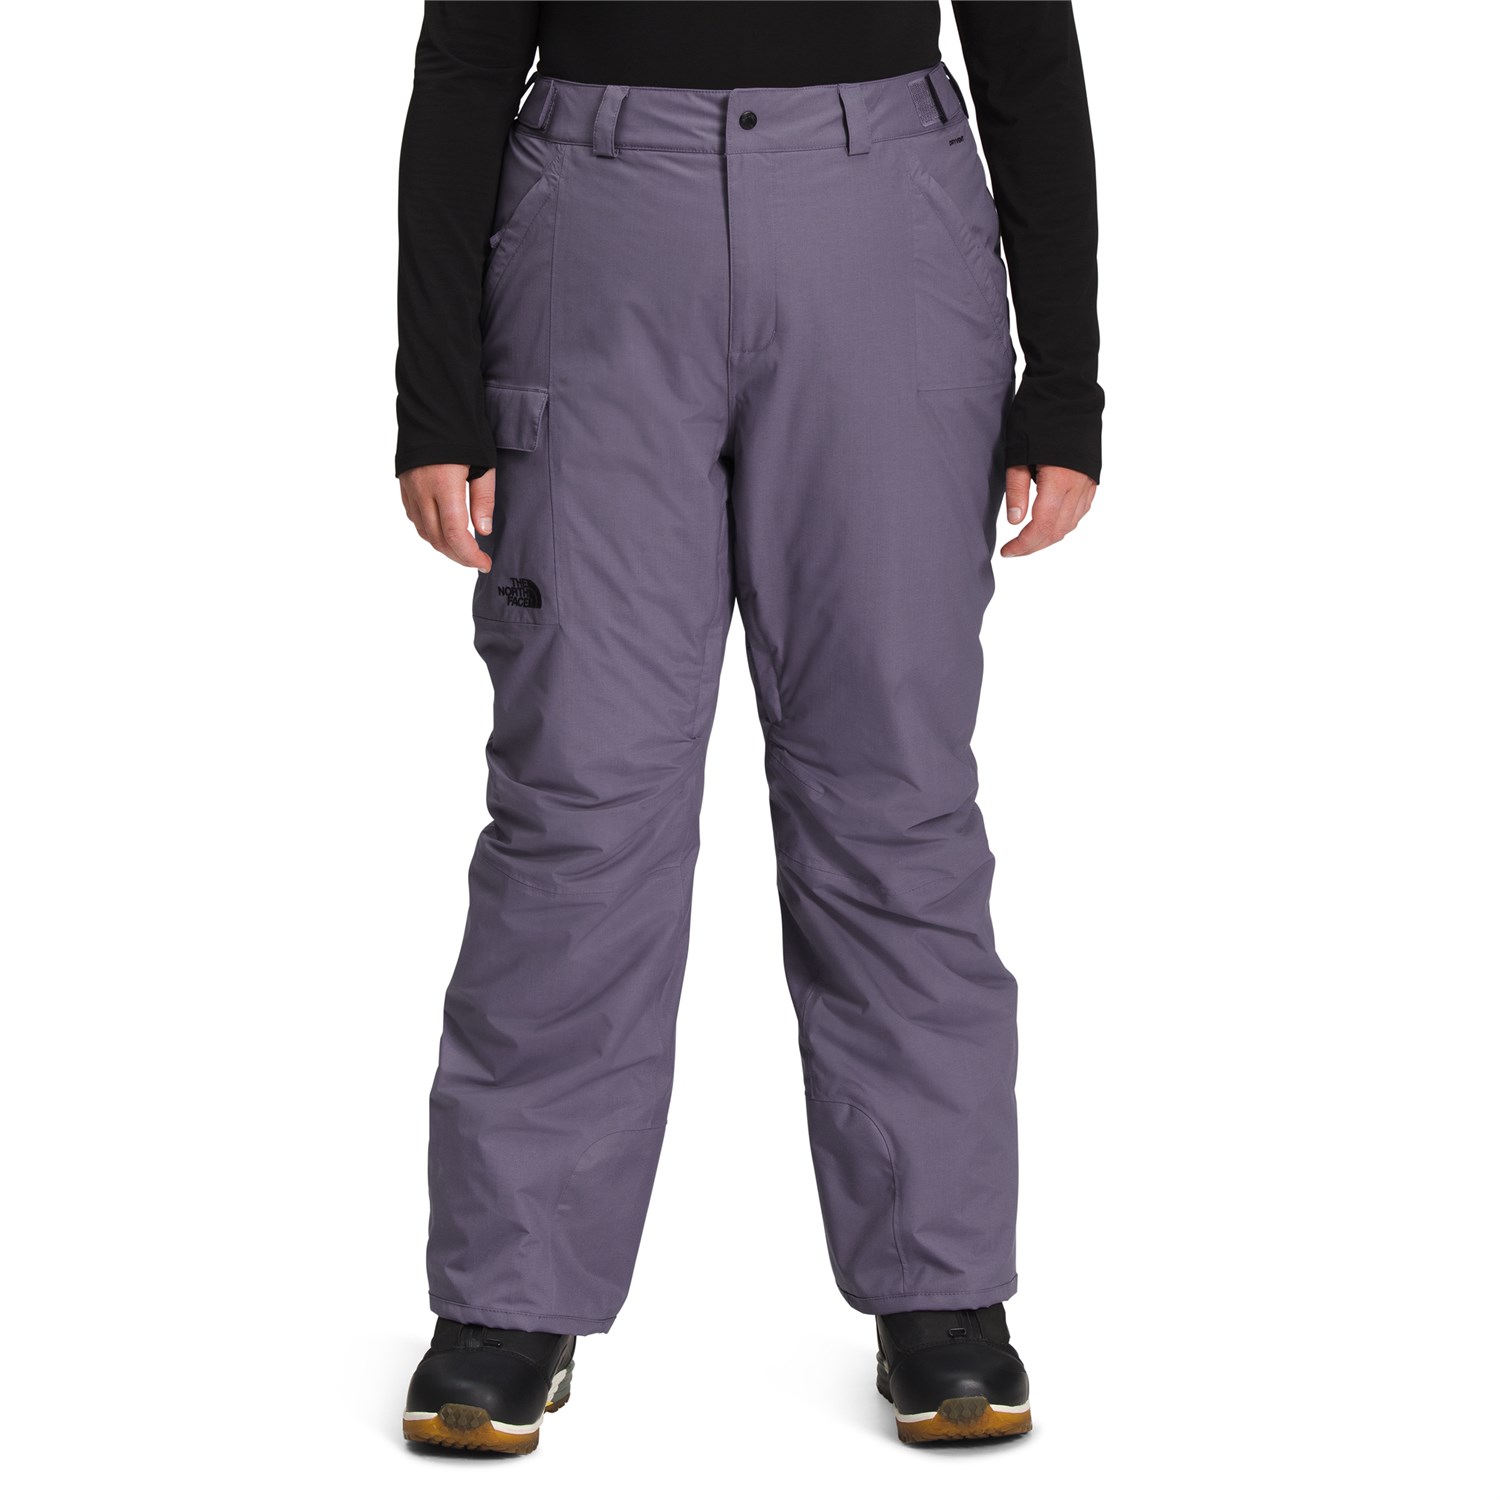 Брюки The North Face Freedom Insulated Plus Tall брюки the north face freedom insulated plus tall цвет mr pink expedition print